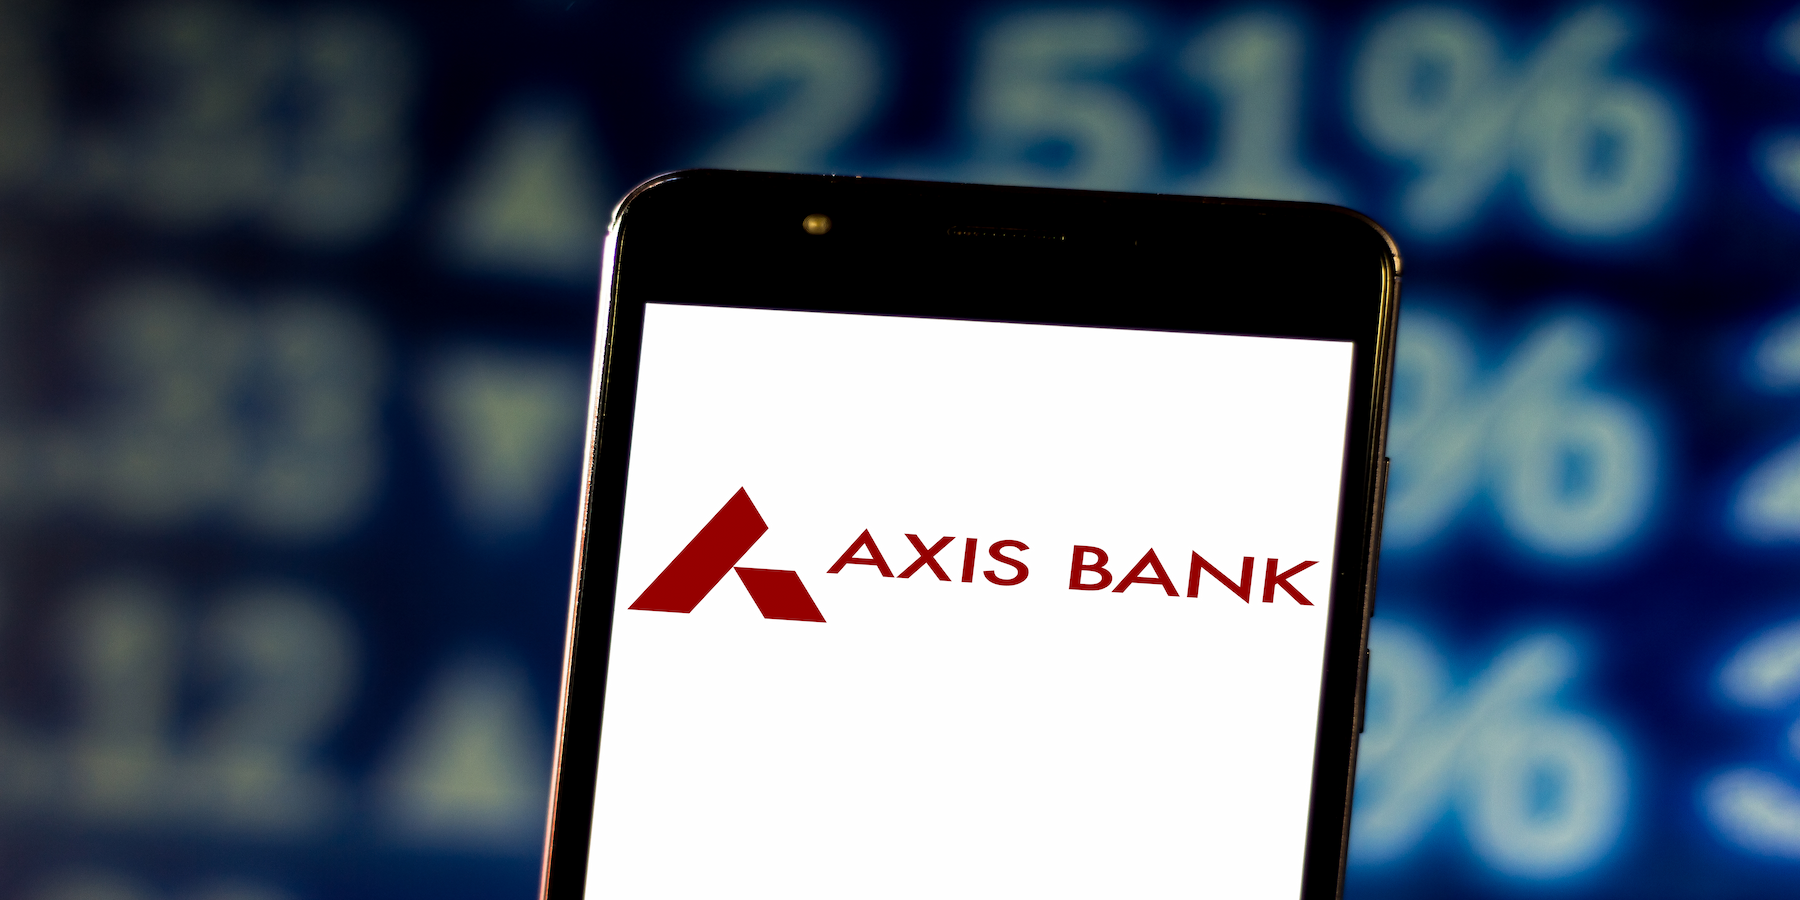 Axis Bank share price dropped despite excellent Q3 results